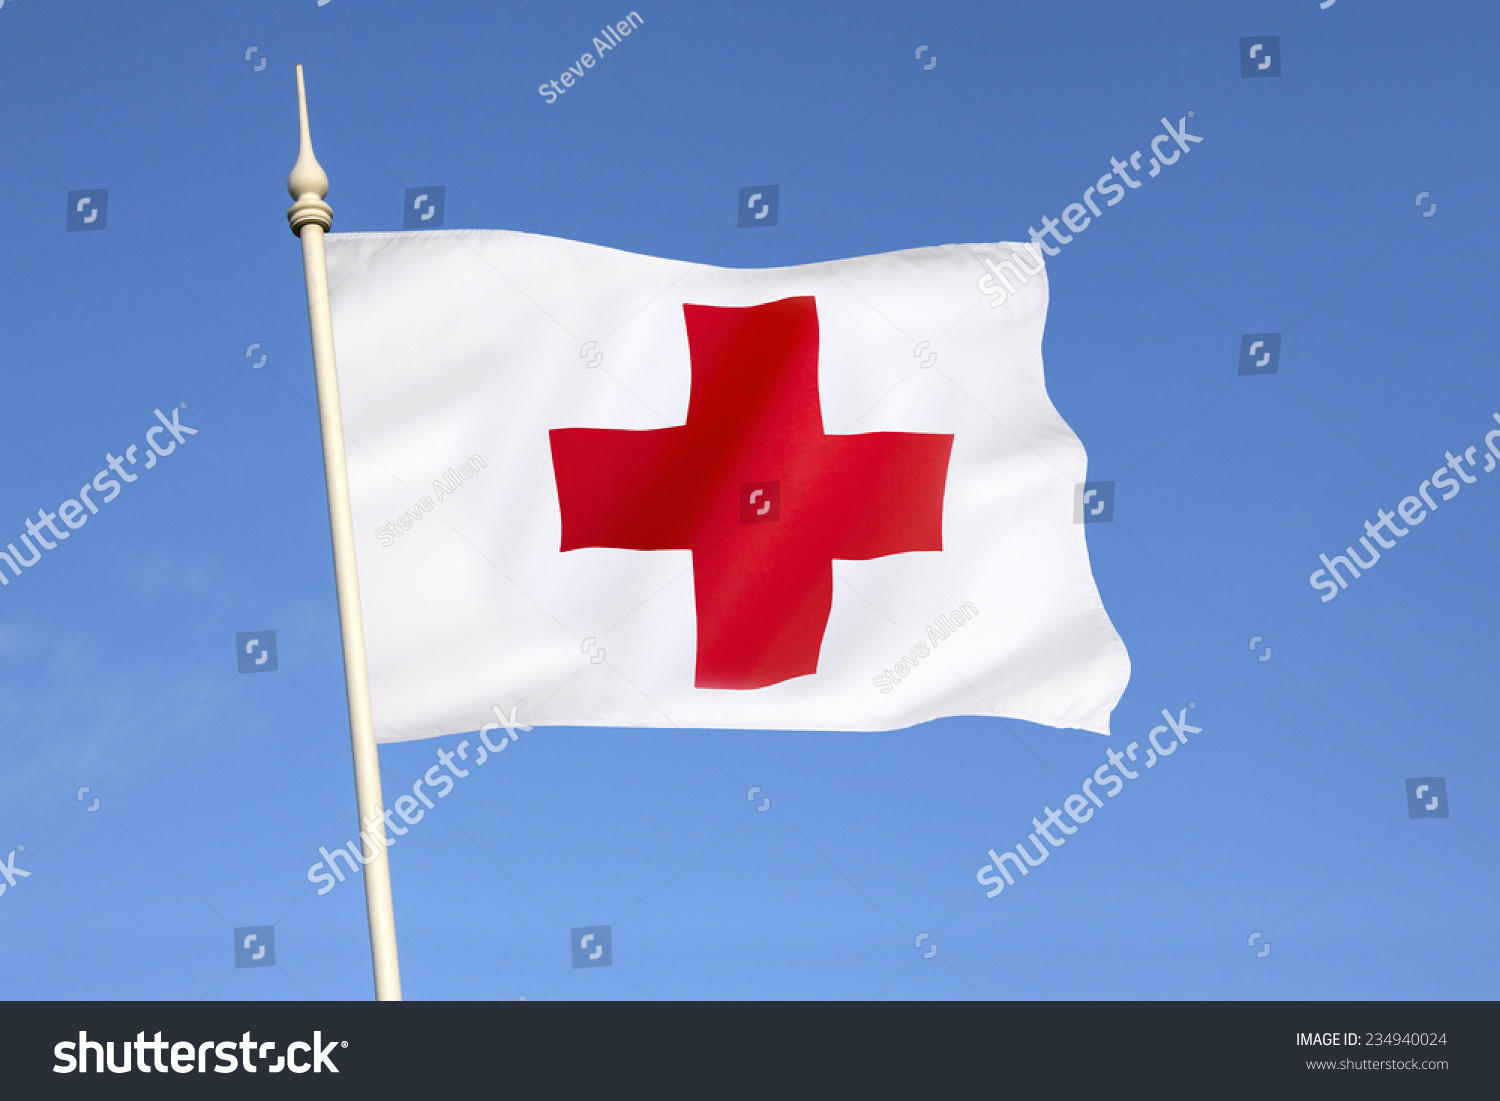 Flag of the Red Cross - the International Movement of the Red Cross and the Red Crescent, are international humanitarian organizations bringing relief to victims of war or natural disaster.  #234940024